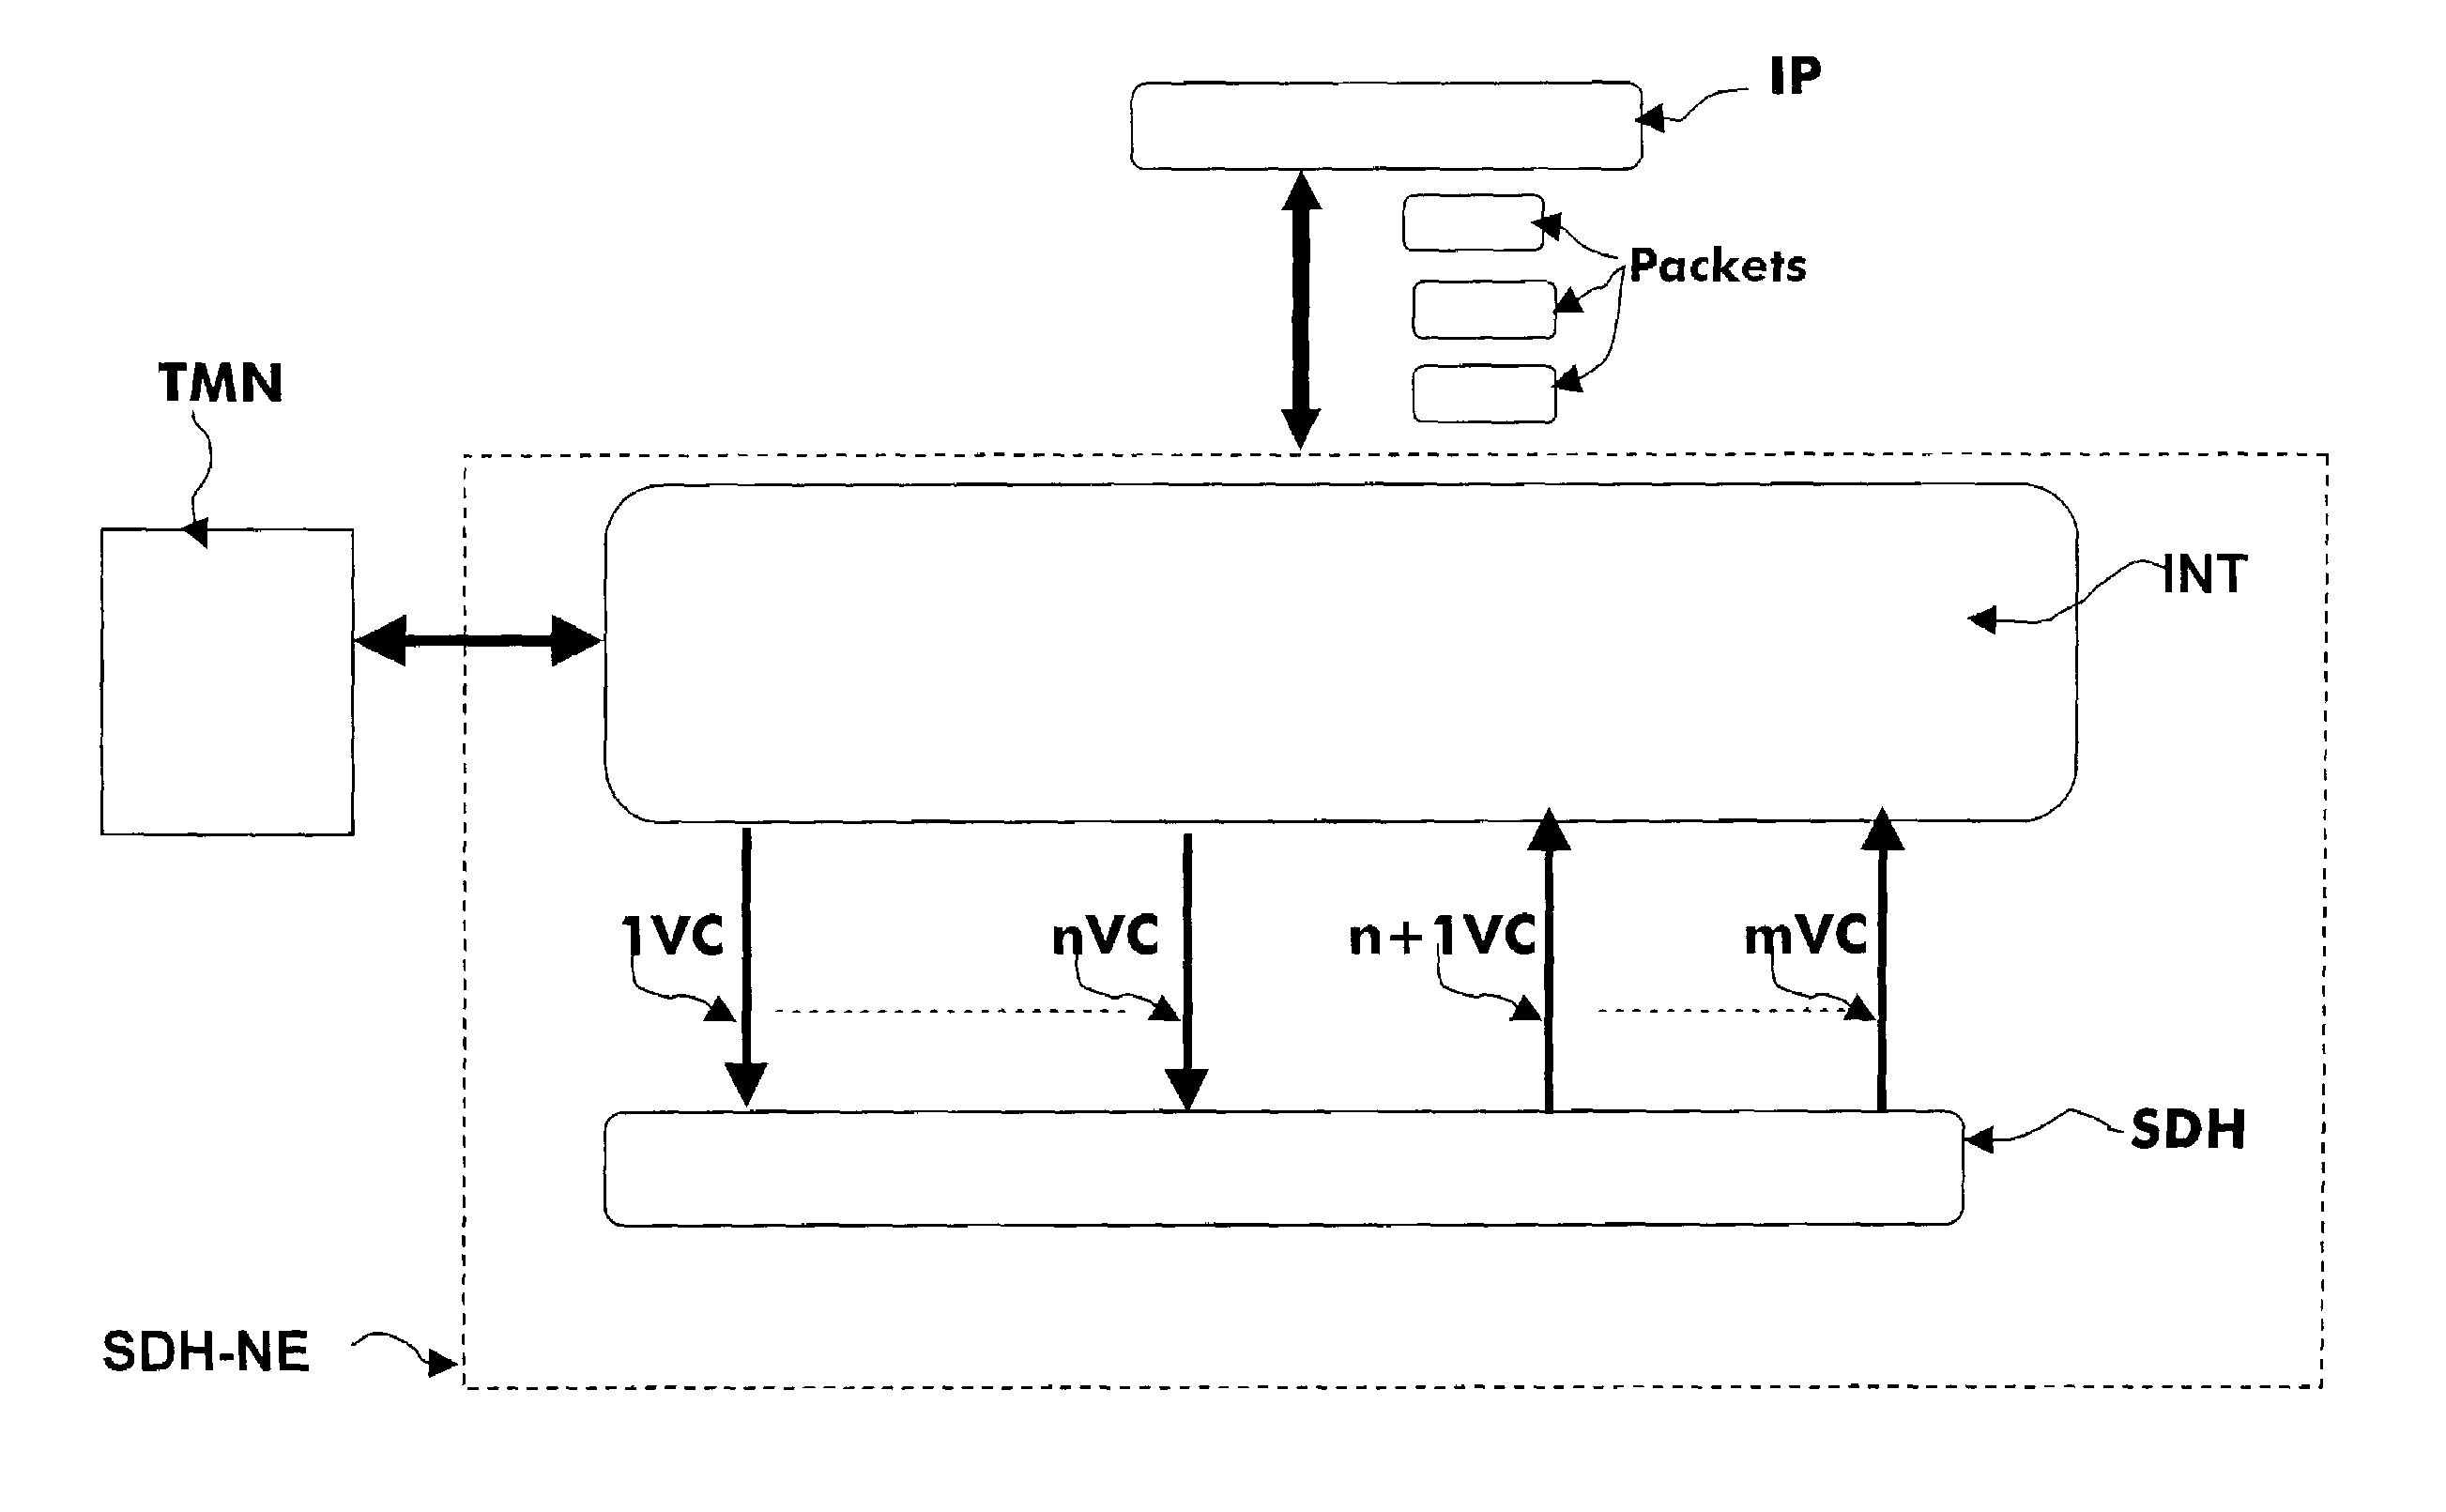 Method and apparatus for obtaining a scalable and managed bandwidth for connections between asynchronous level and synchronous hierarchy level in a telecommunication network